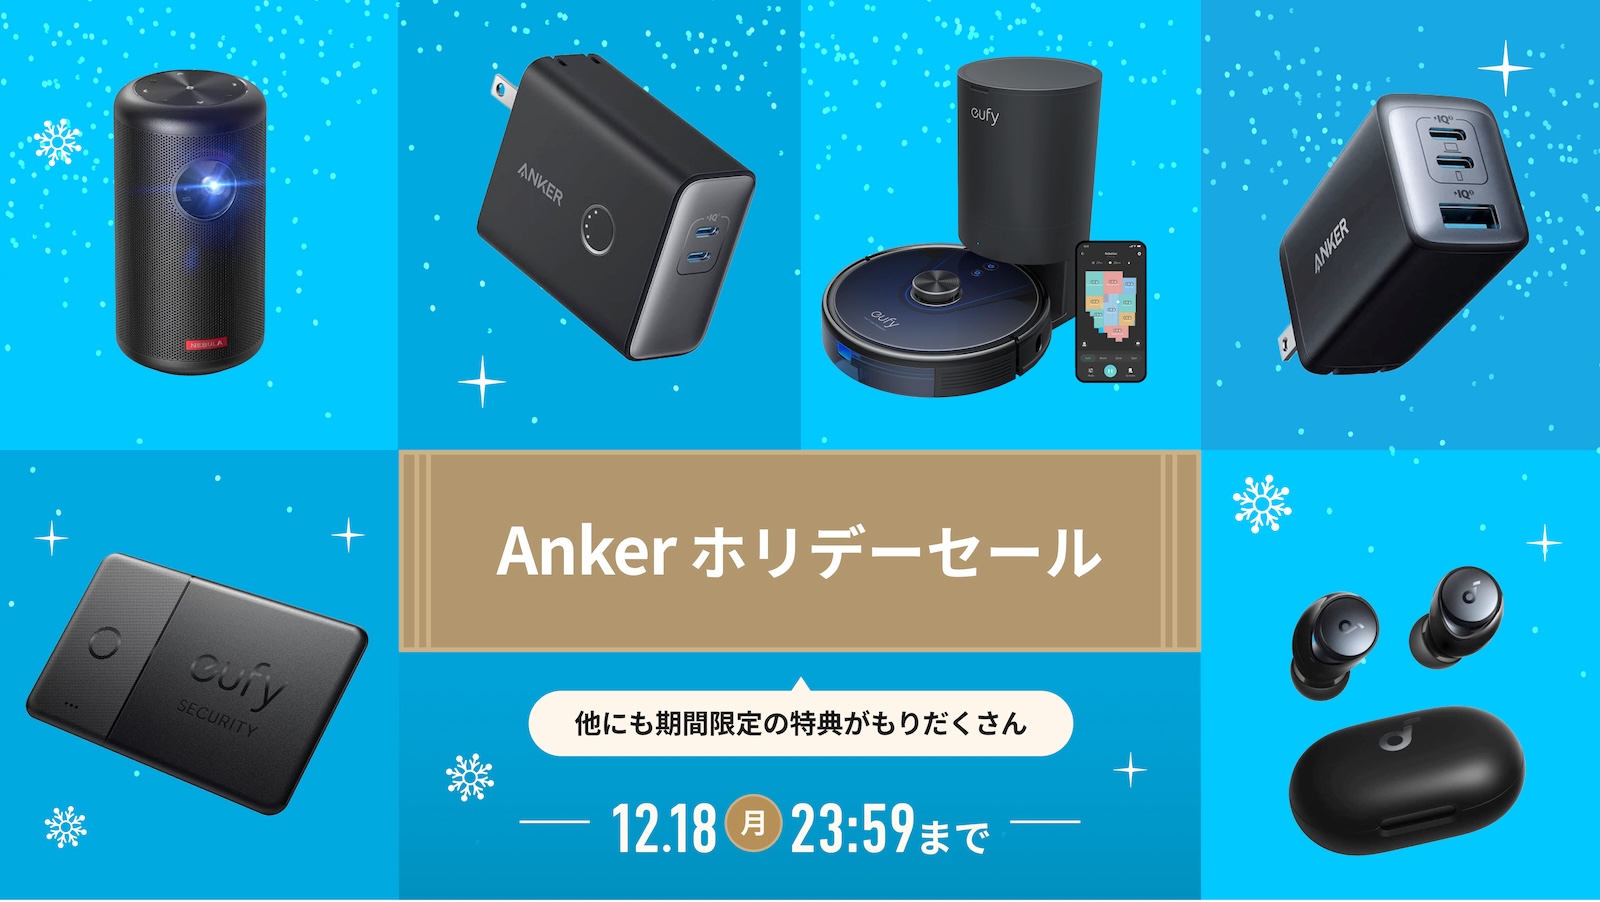 Anker Holiday sale official site